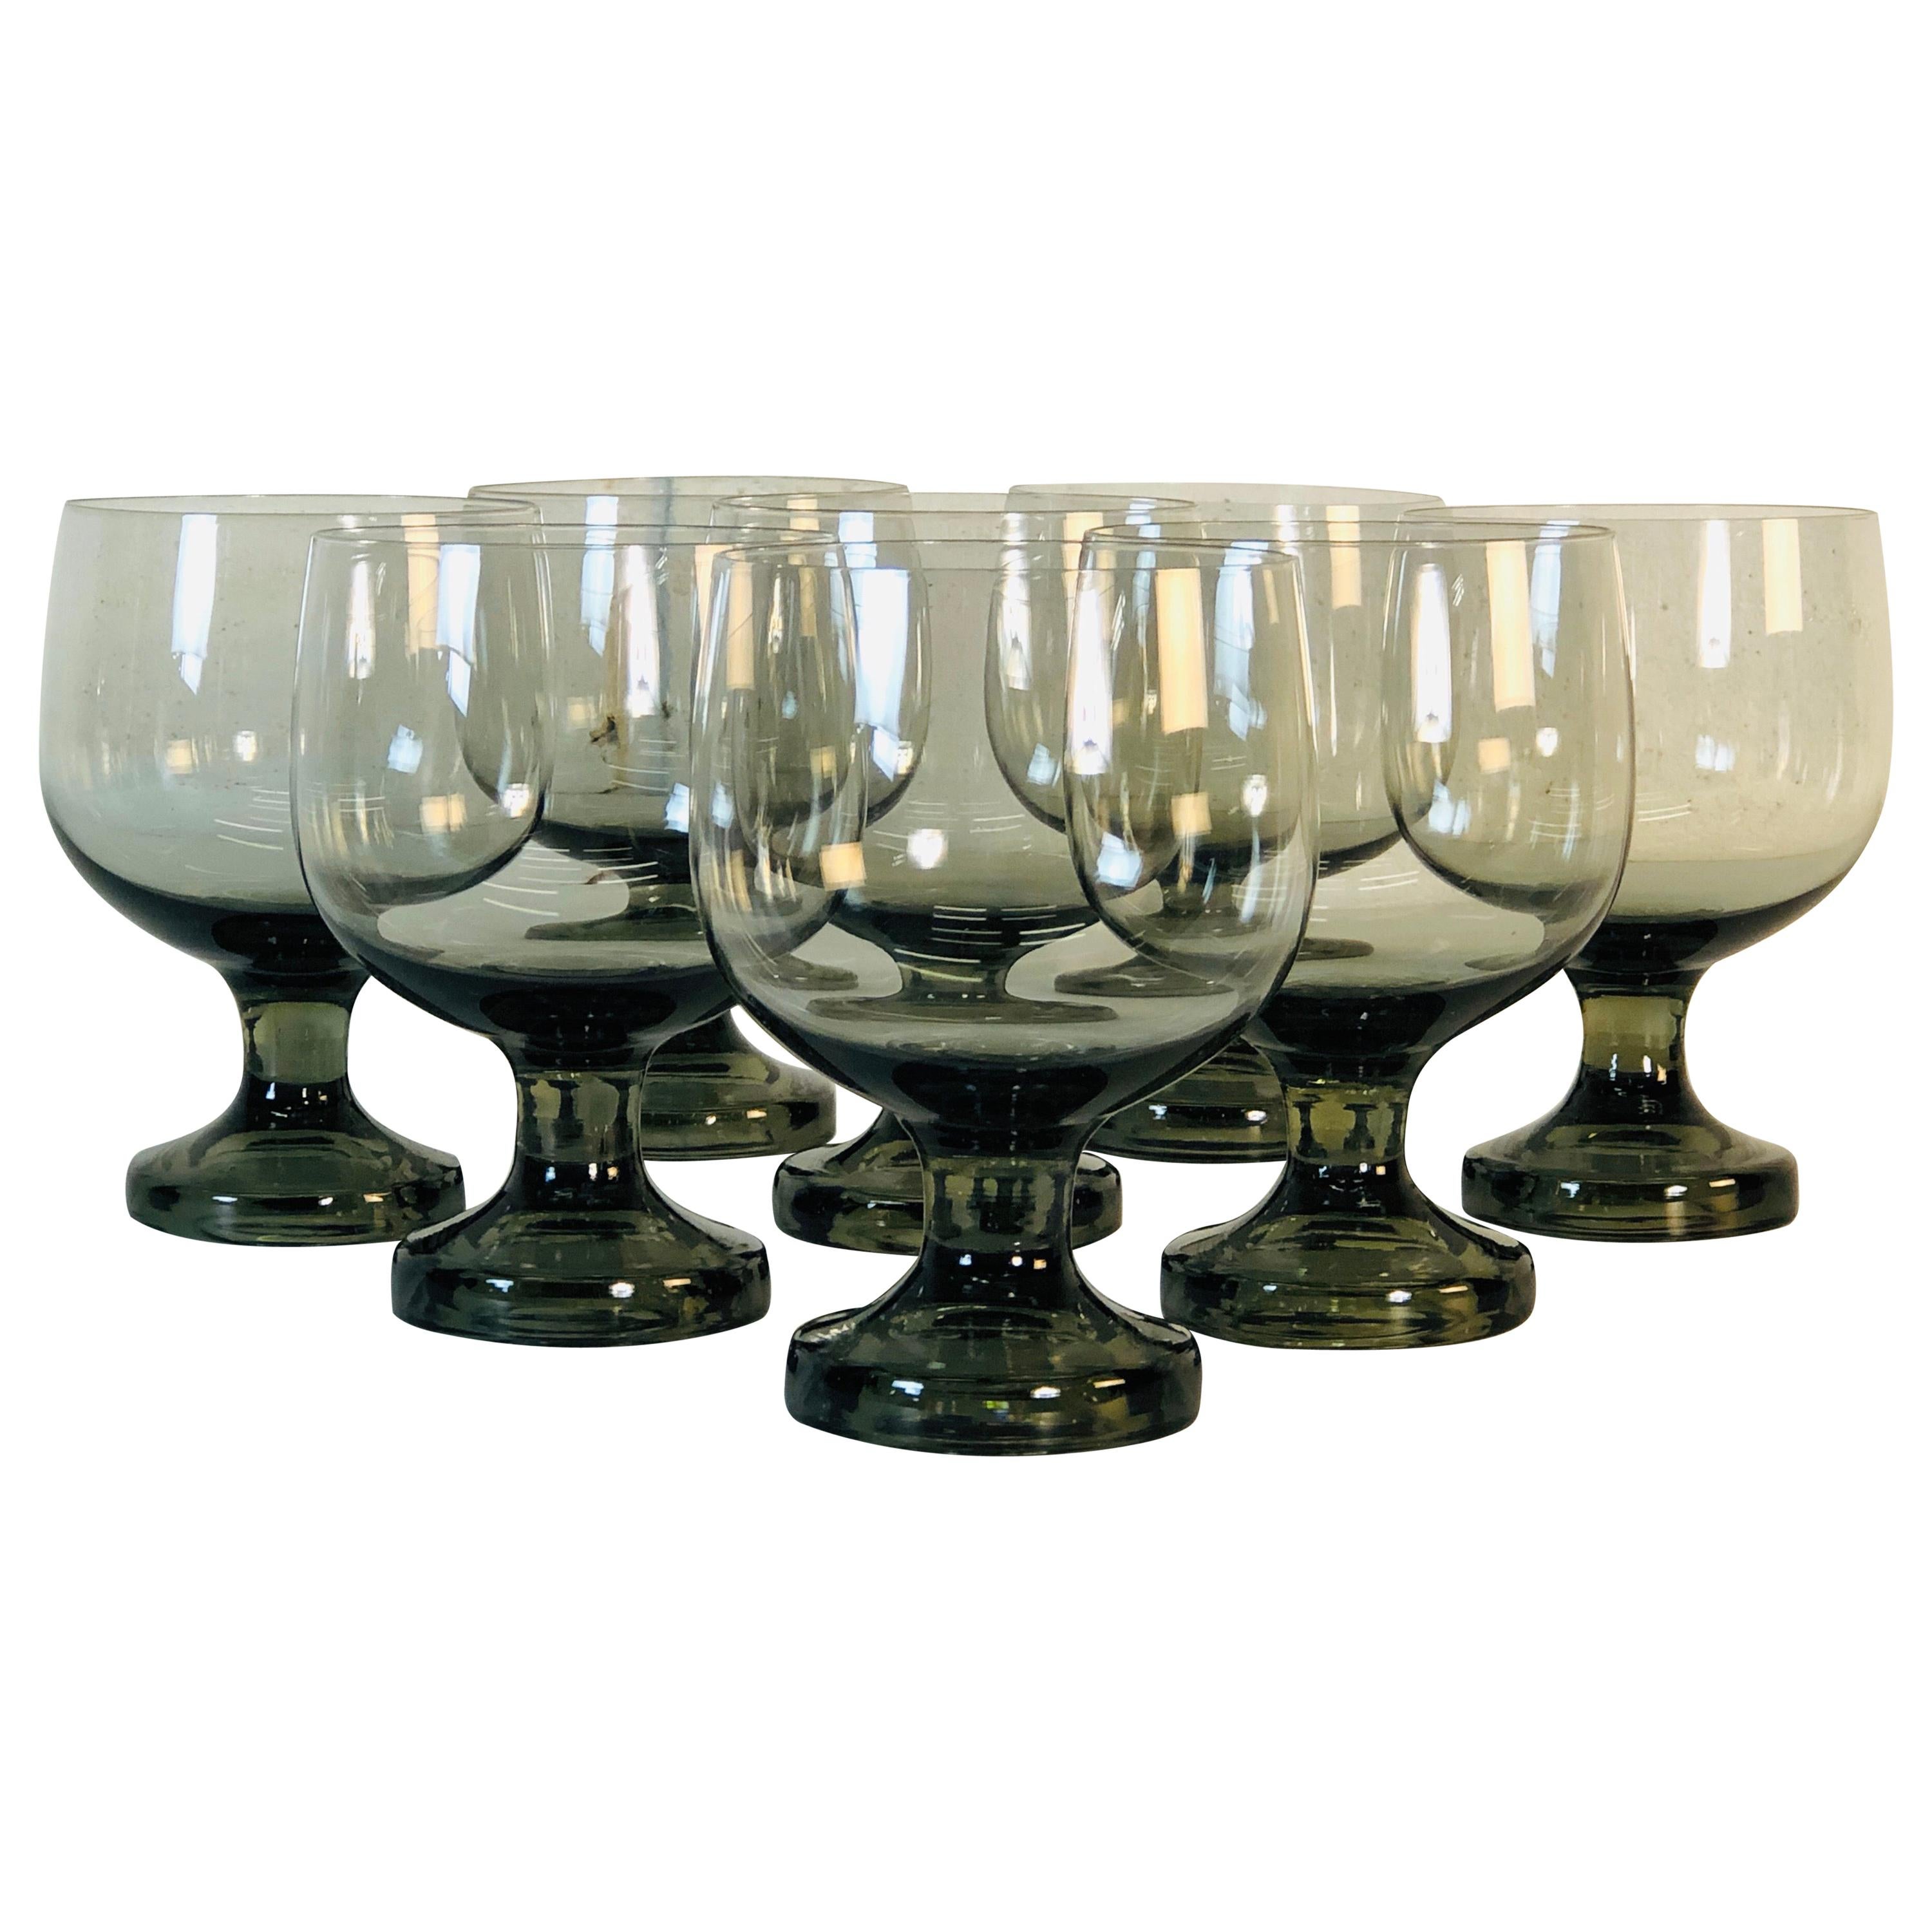 Vintage 1960s Smoked Glass Goblets, Set of 8